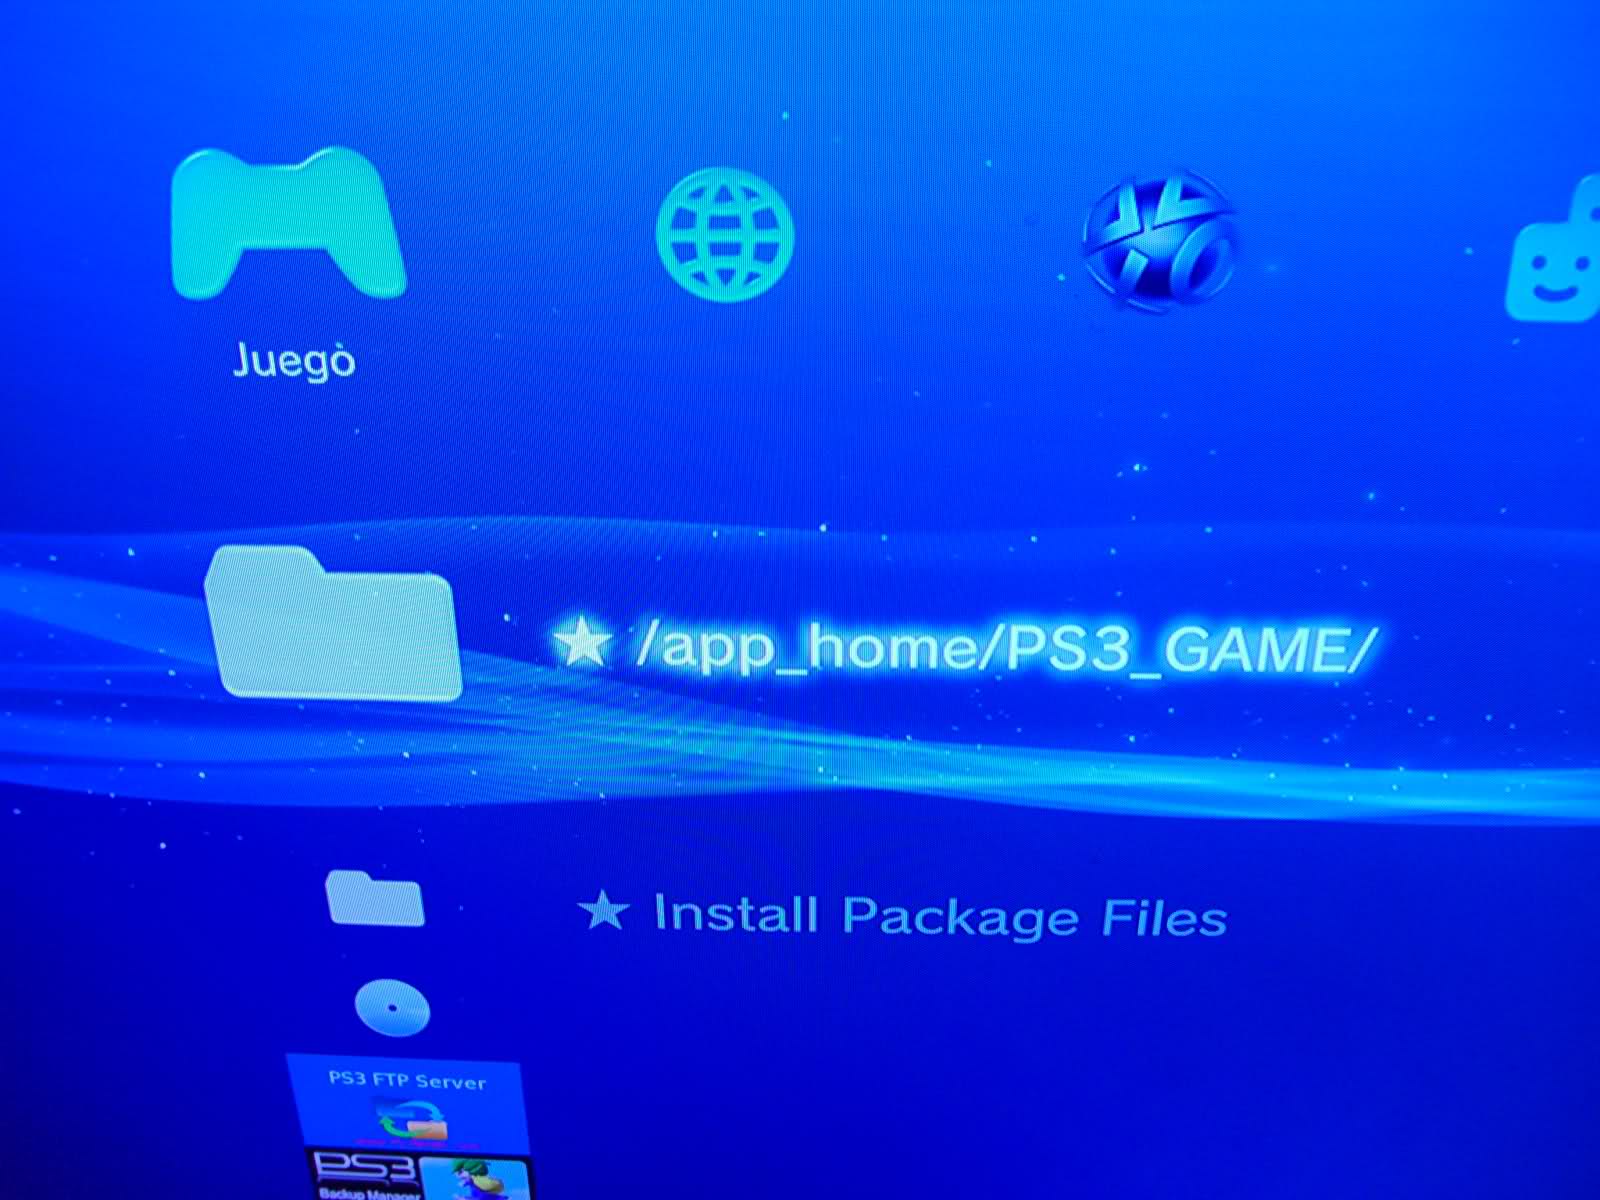 How to get install package files on ps3